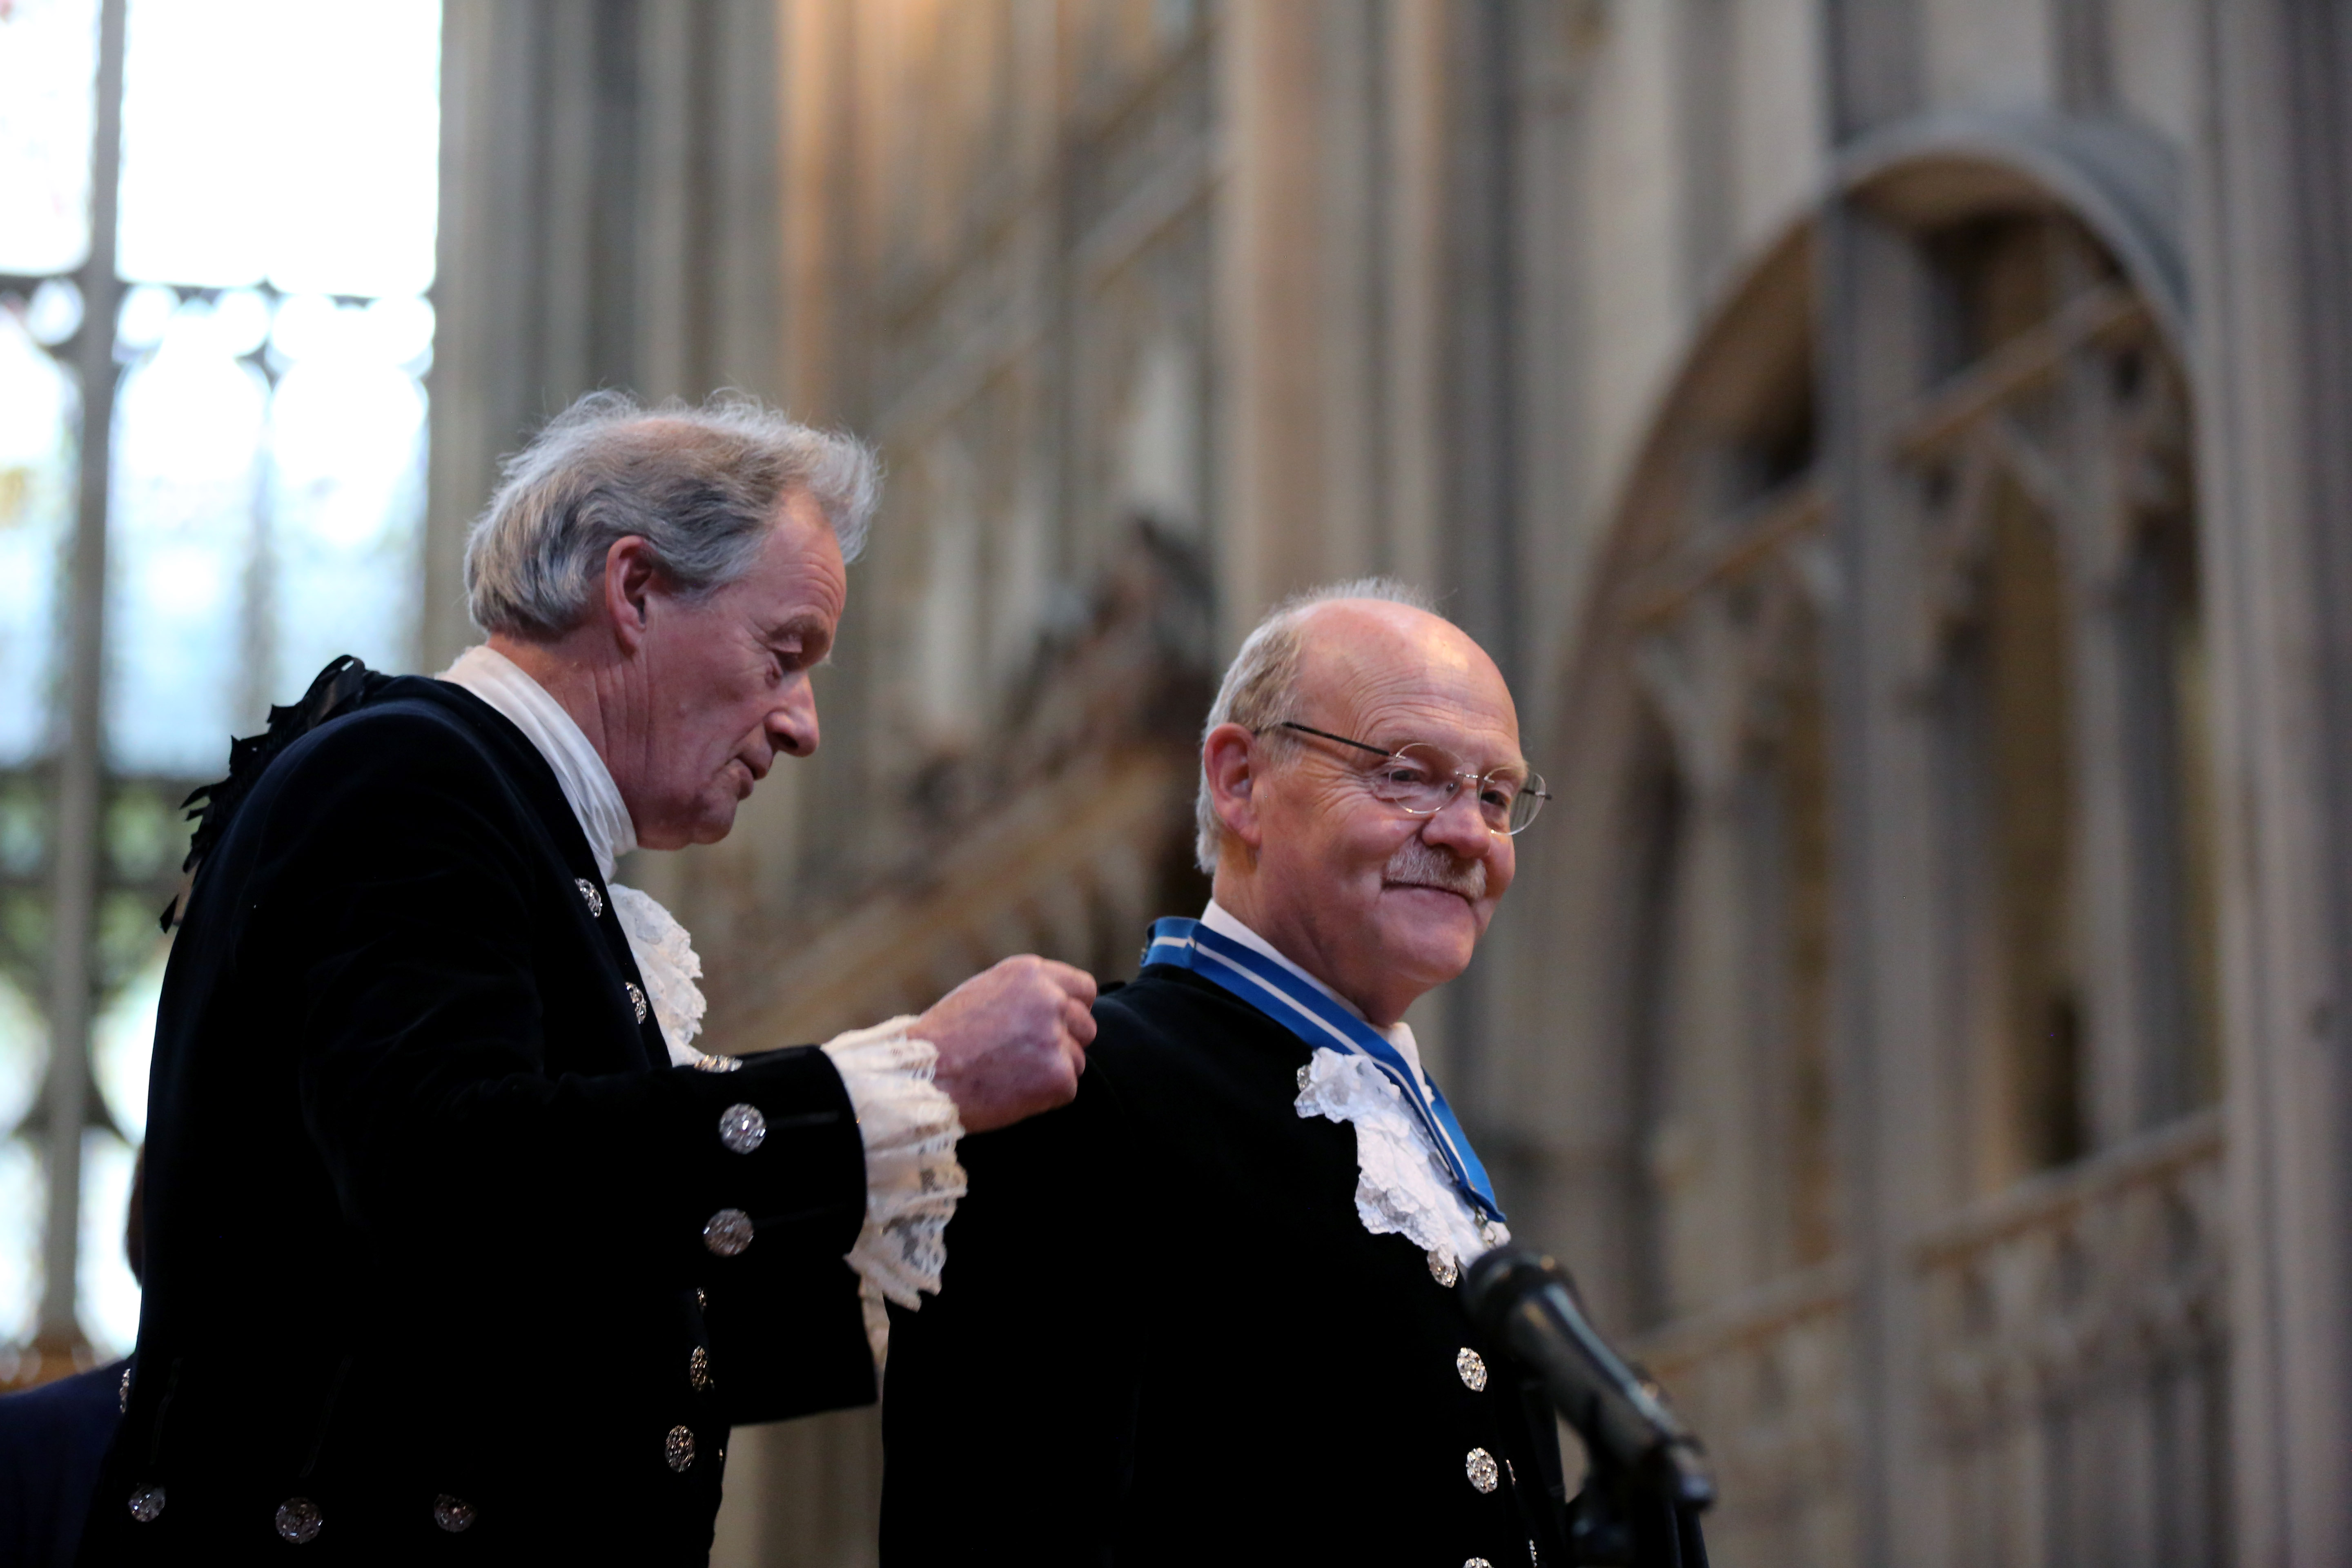 Mark is given the High Sheriff medal from Henry Robinson (outgoing High Sheriff)